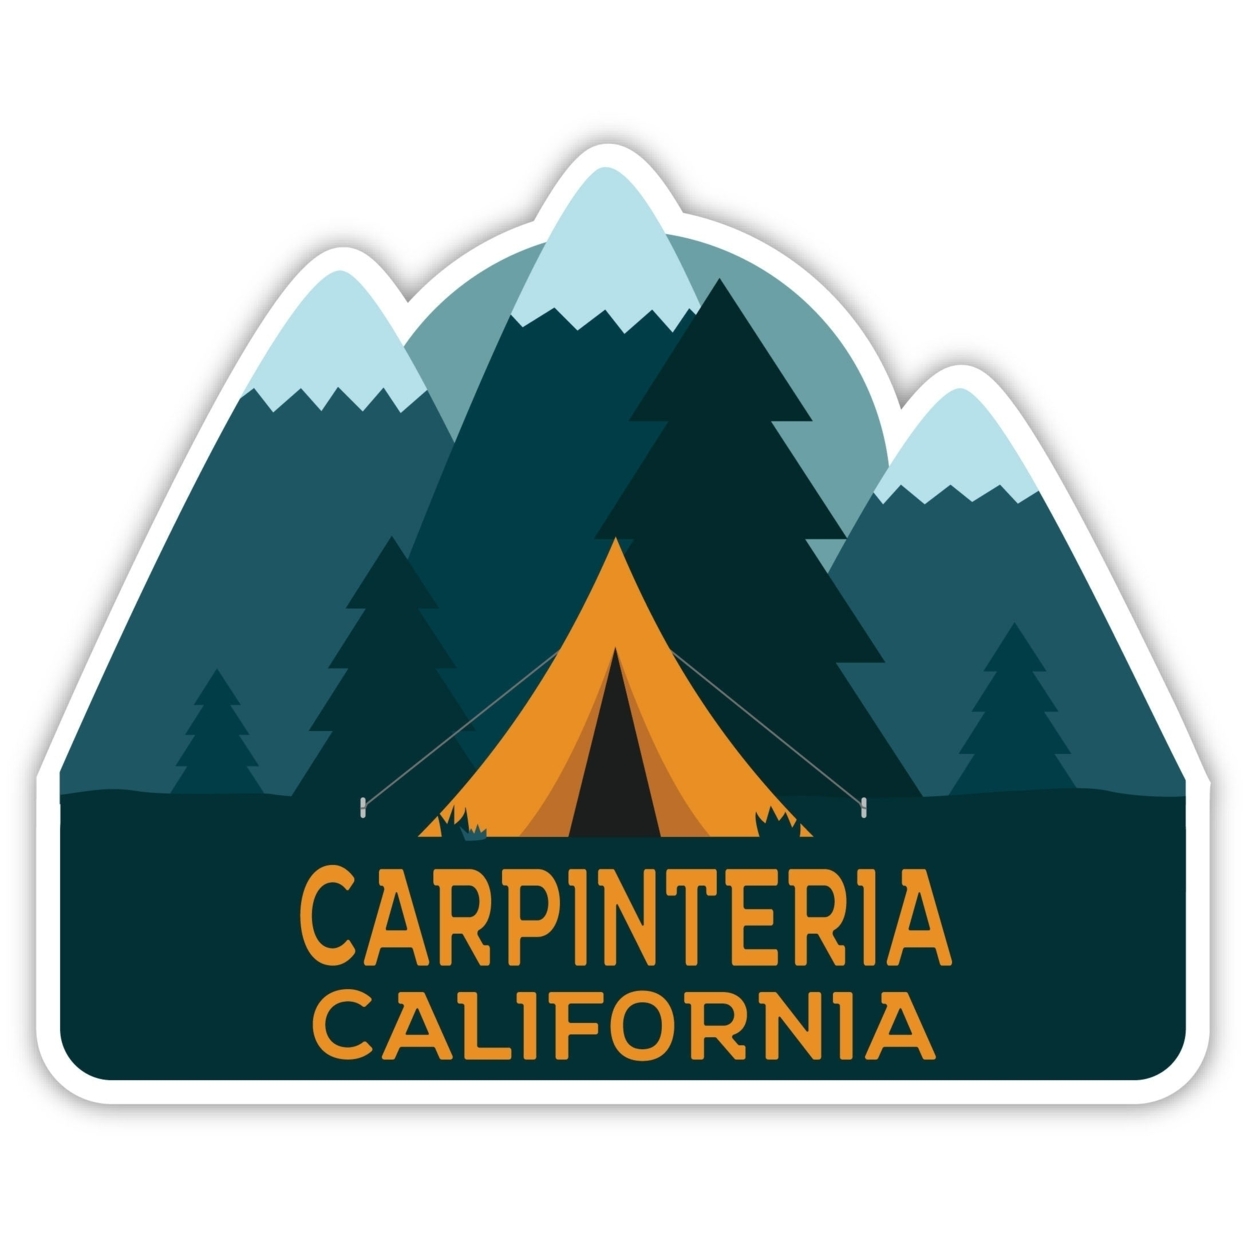 Carpinteria California Souvenir Decorative Stickers (Choose Theme And Size) - 4-Pack, 4-Inch, Great Outdoors